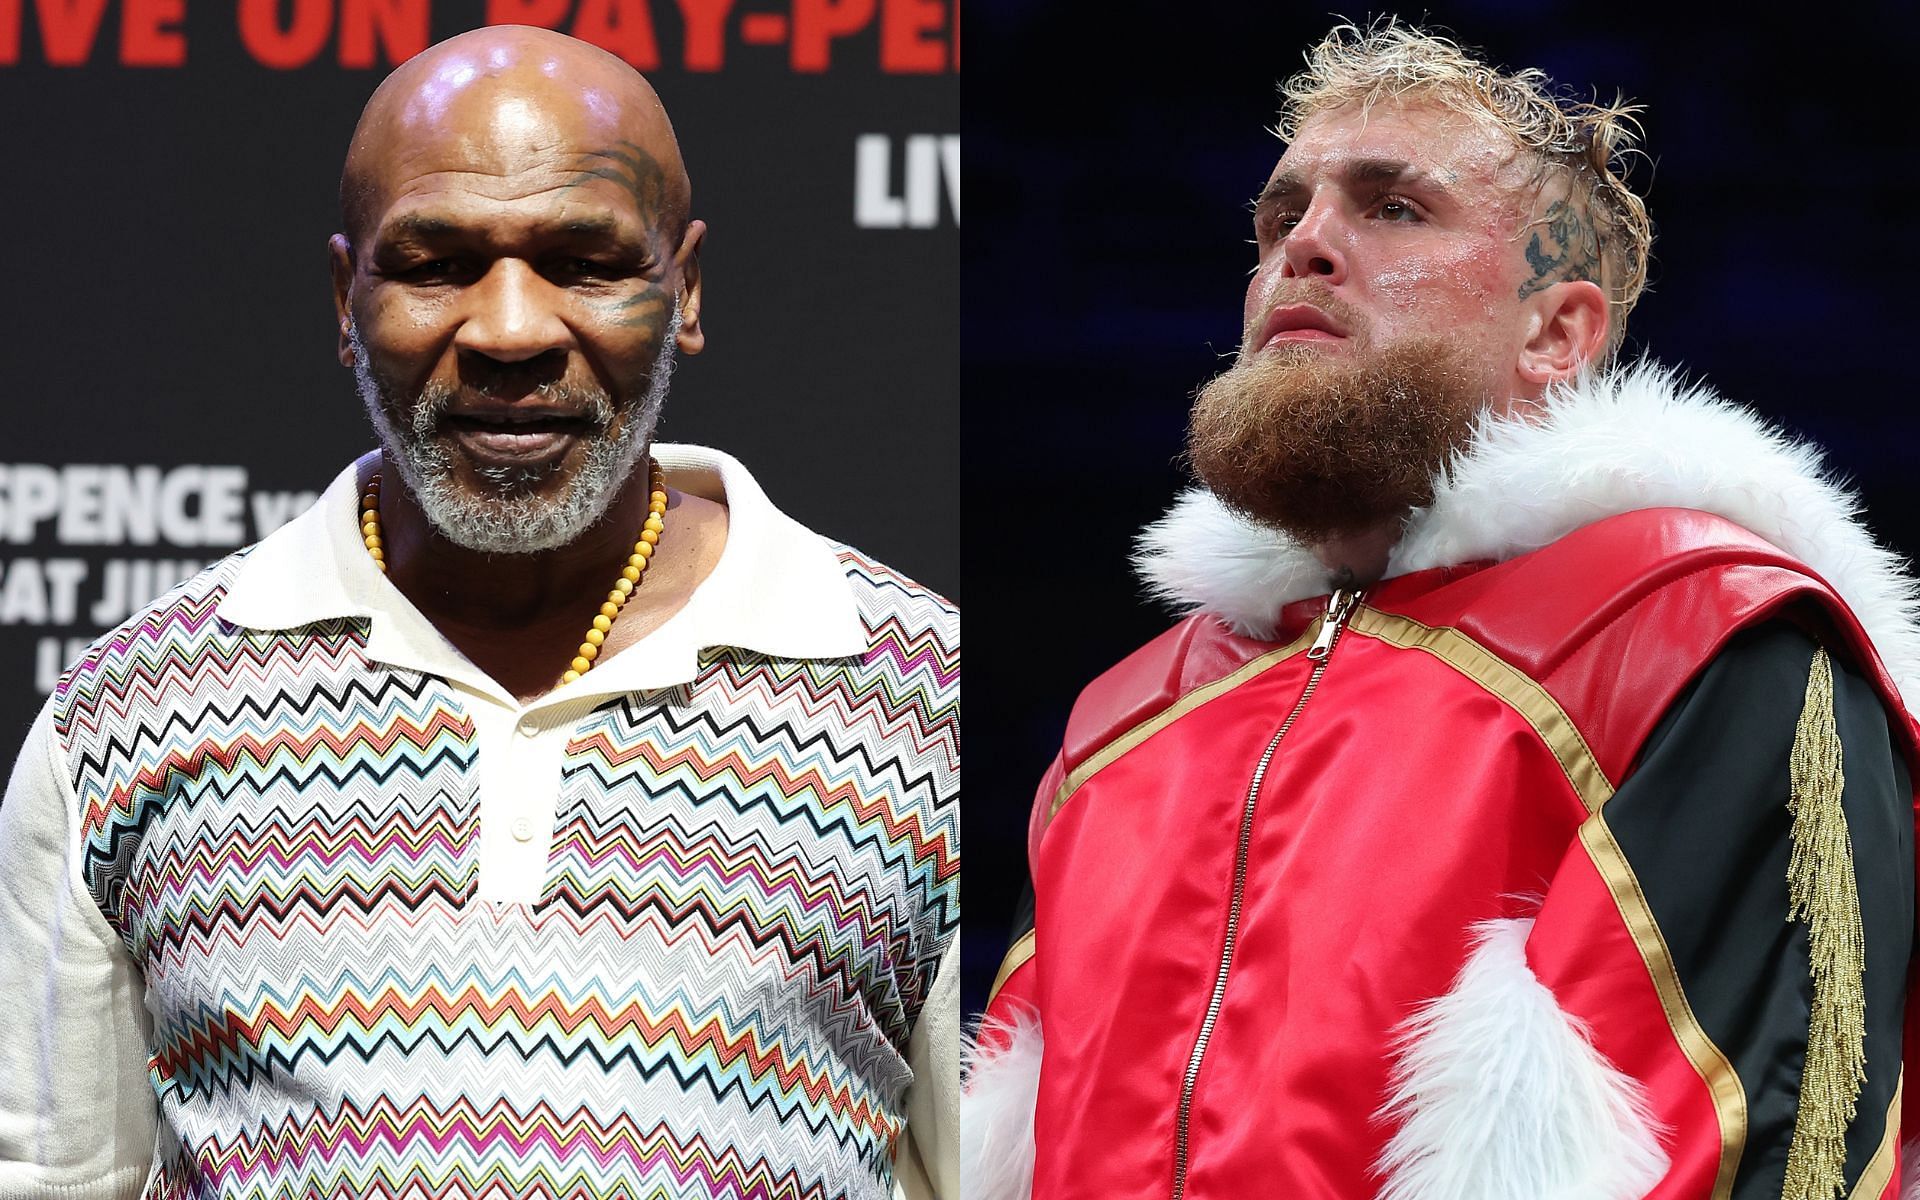 Mike Tyson (left) seems primed to clash against Jake Paul (right), returning to the squared circle for the first time since November 2020 [Images courtesy: Getty Images]